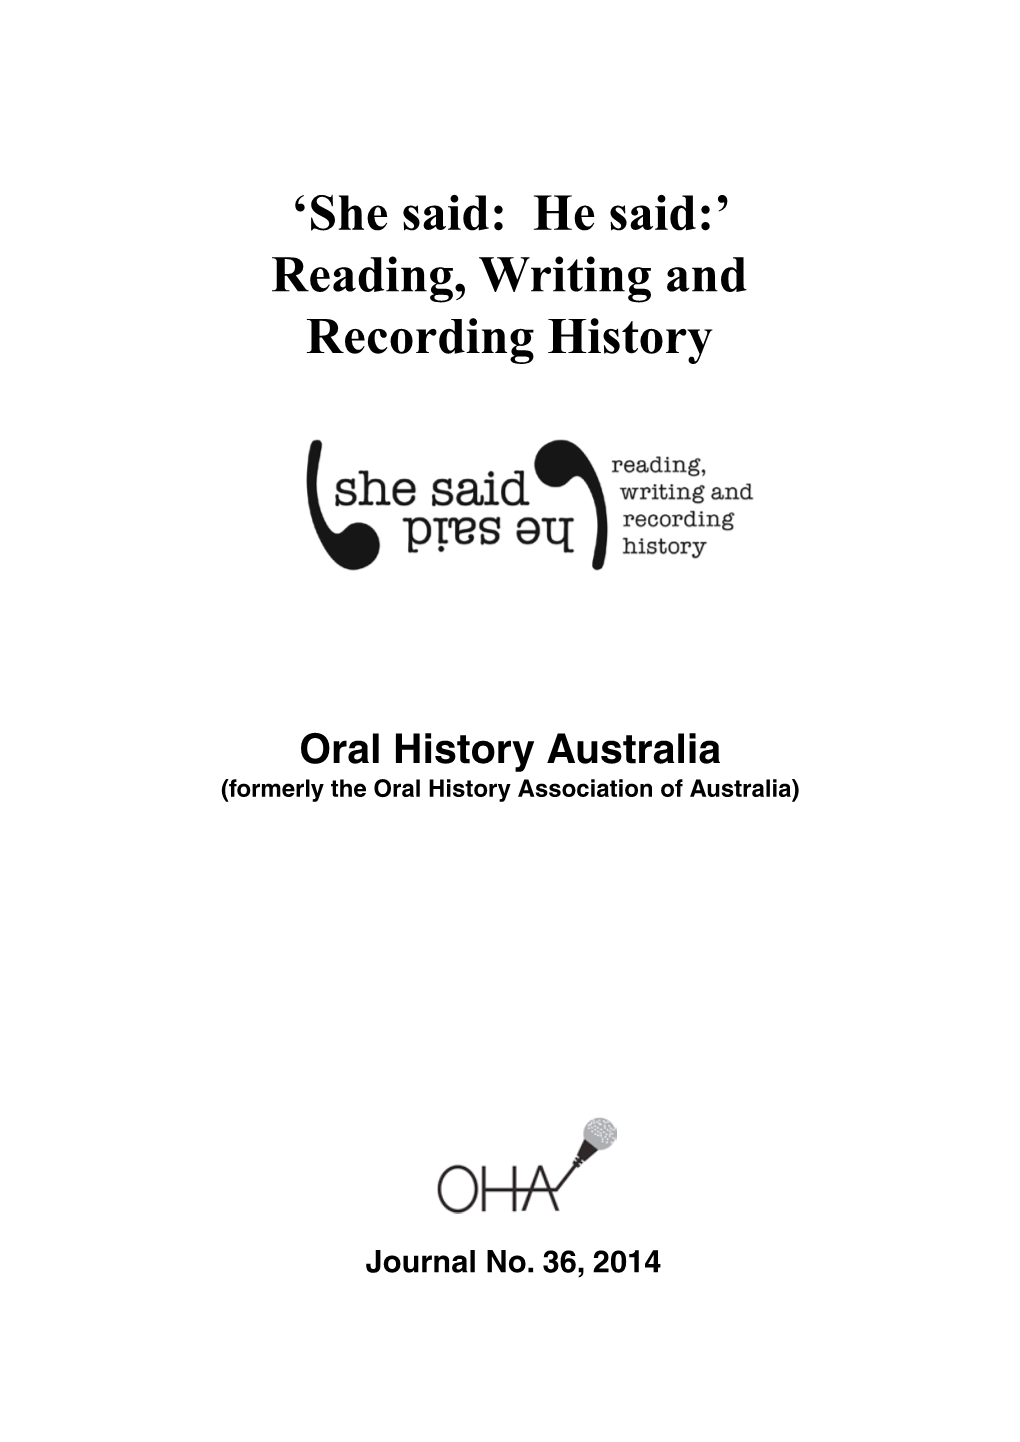 Reading, Writing and Recording History